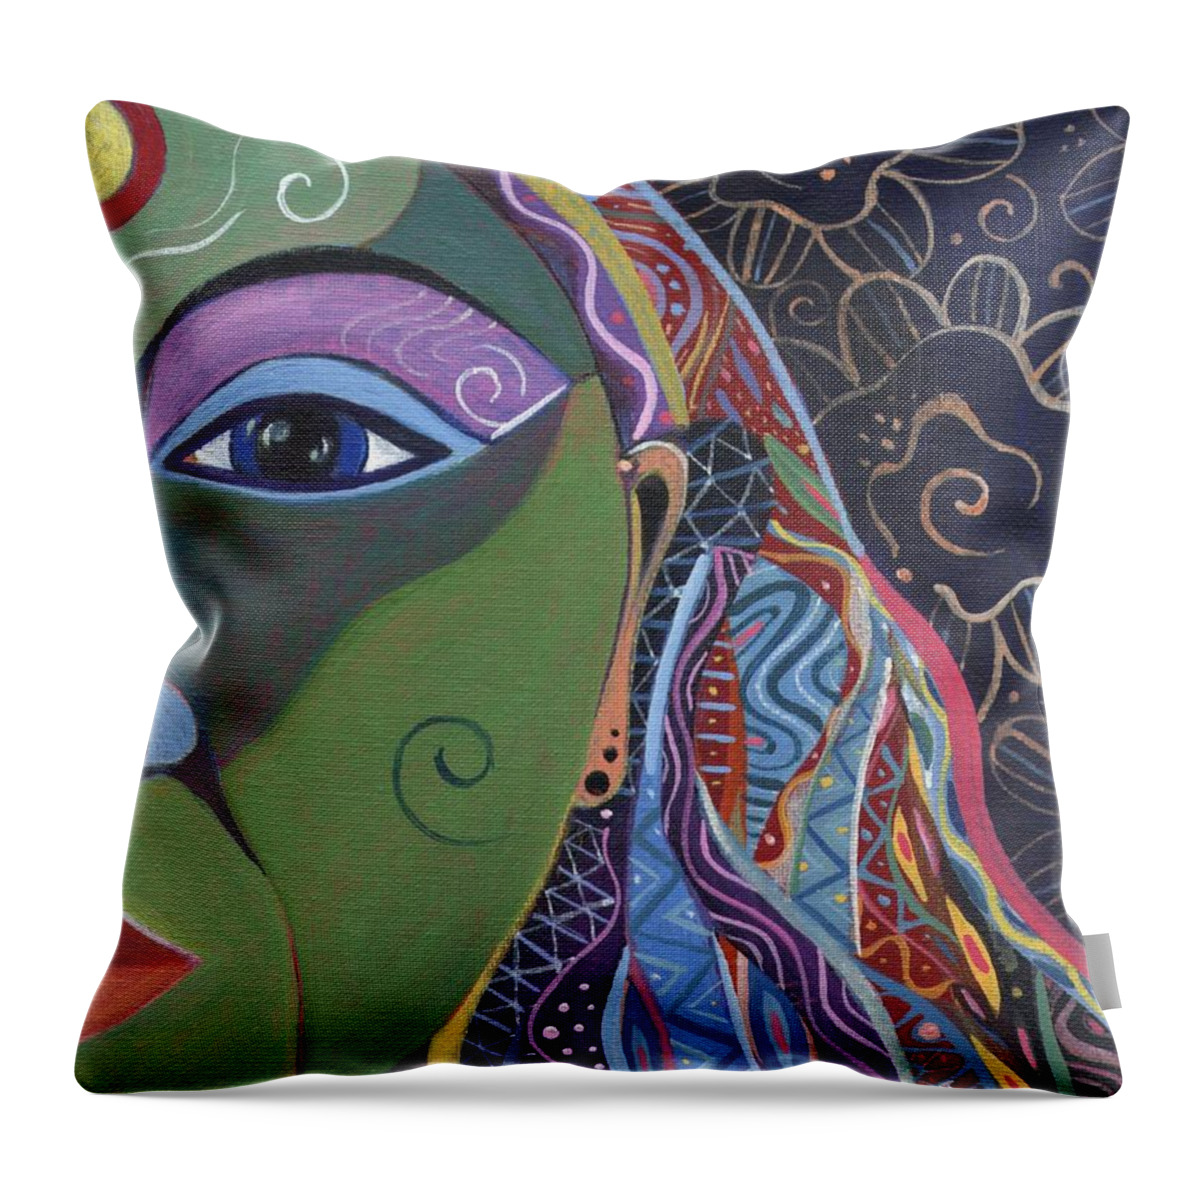 Woman Throw Pillow featuring the painting Still A Mystery 5 by Helena Tiainen